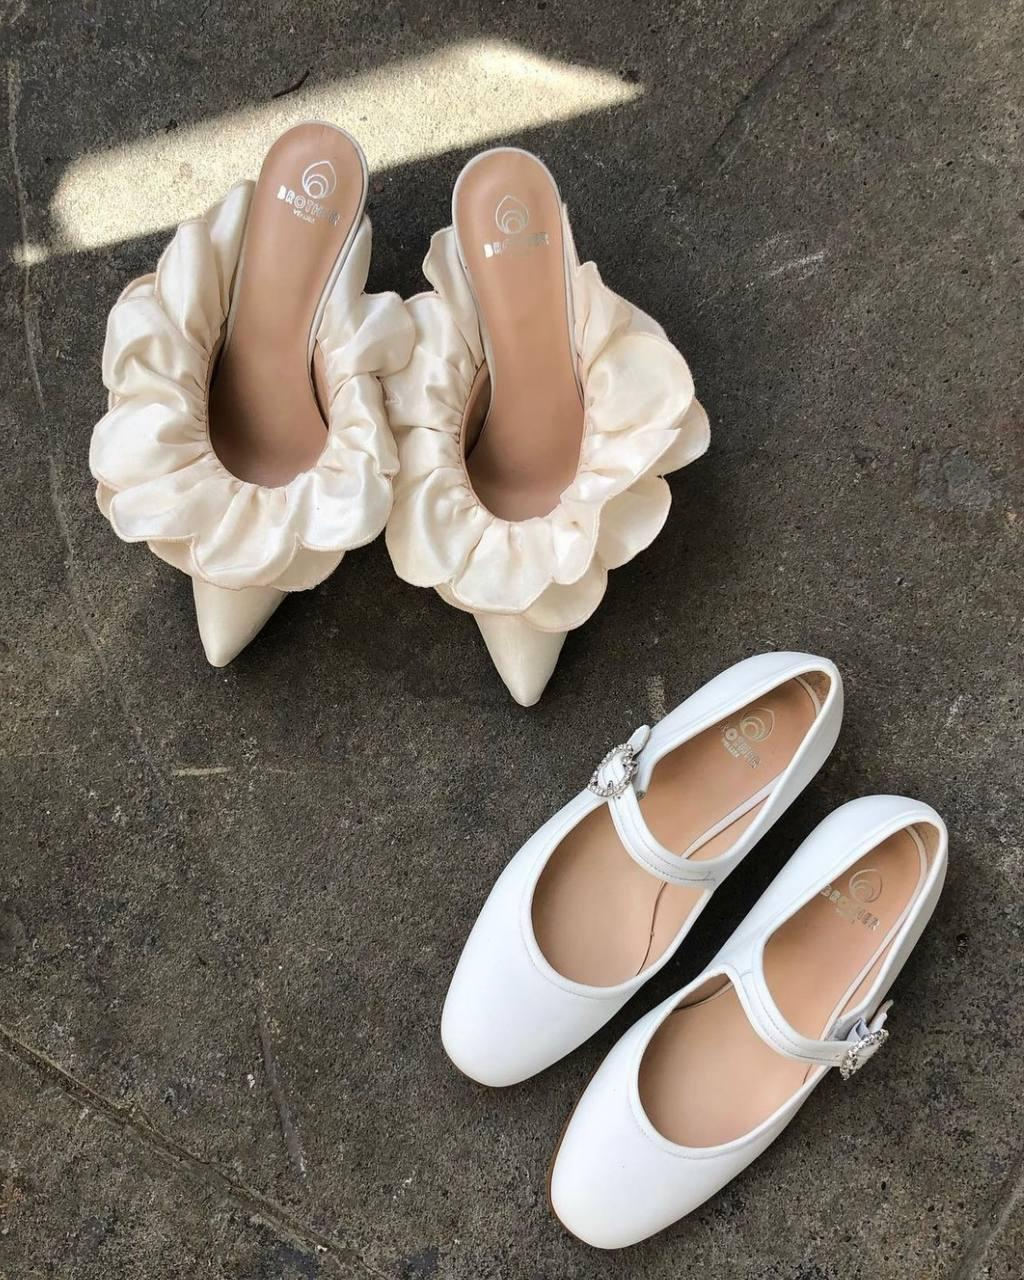 30 Comfortable Wedding Shoes That Are Flats, Wedges & Low Heels